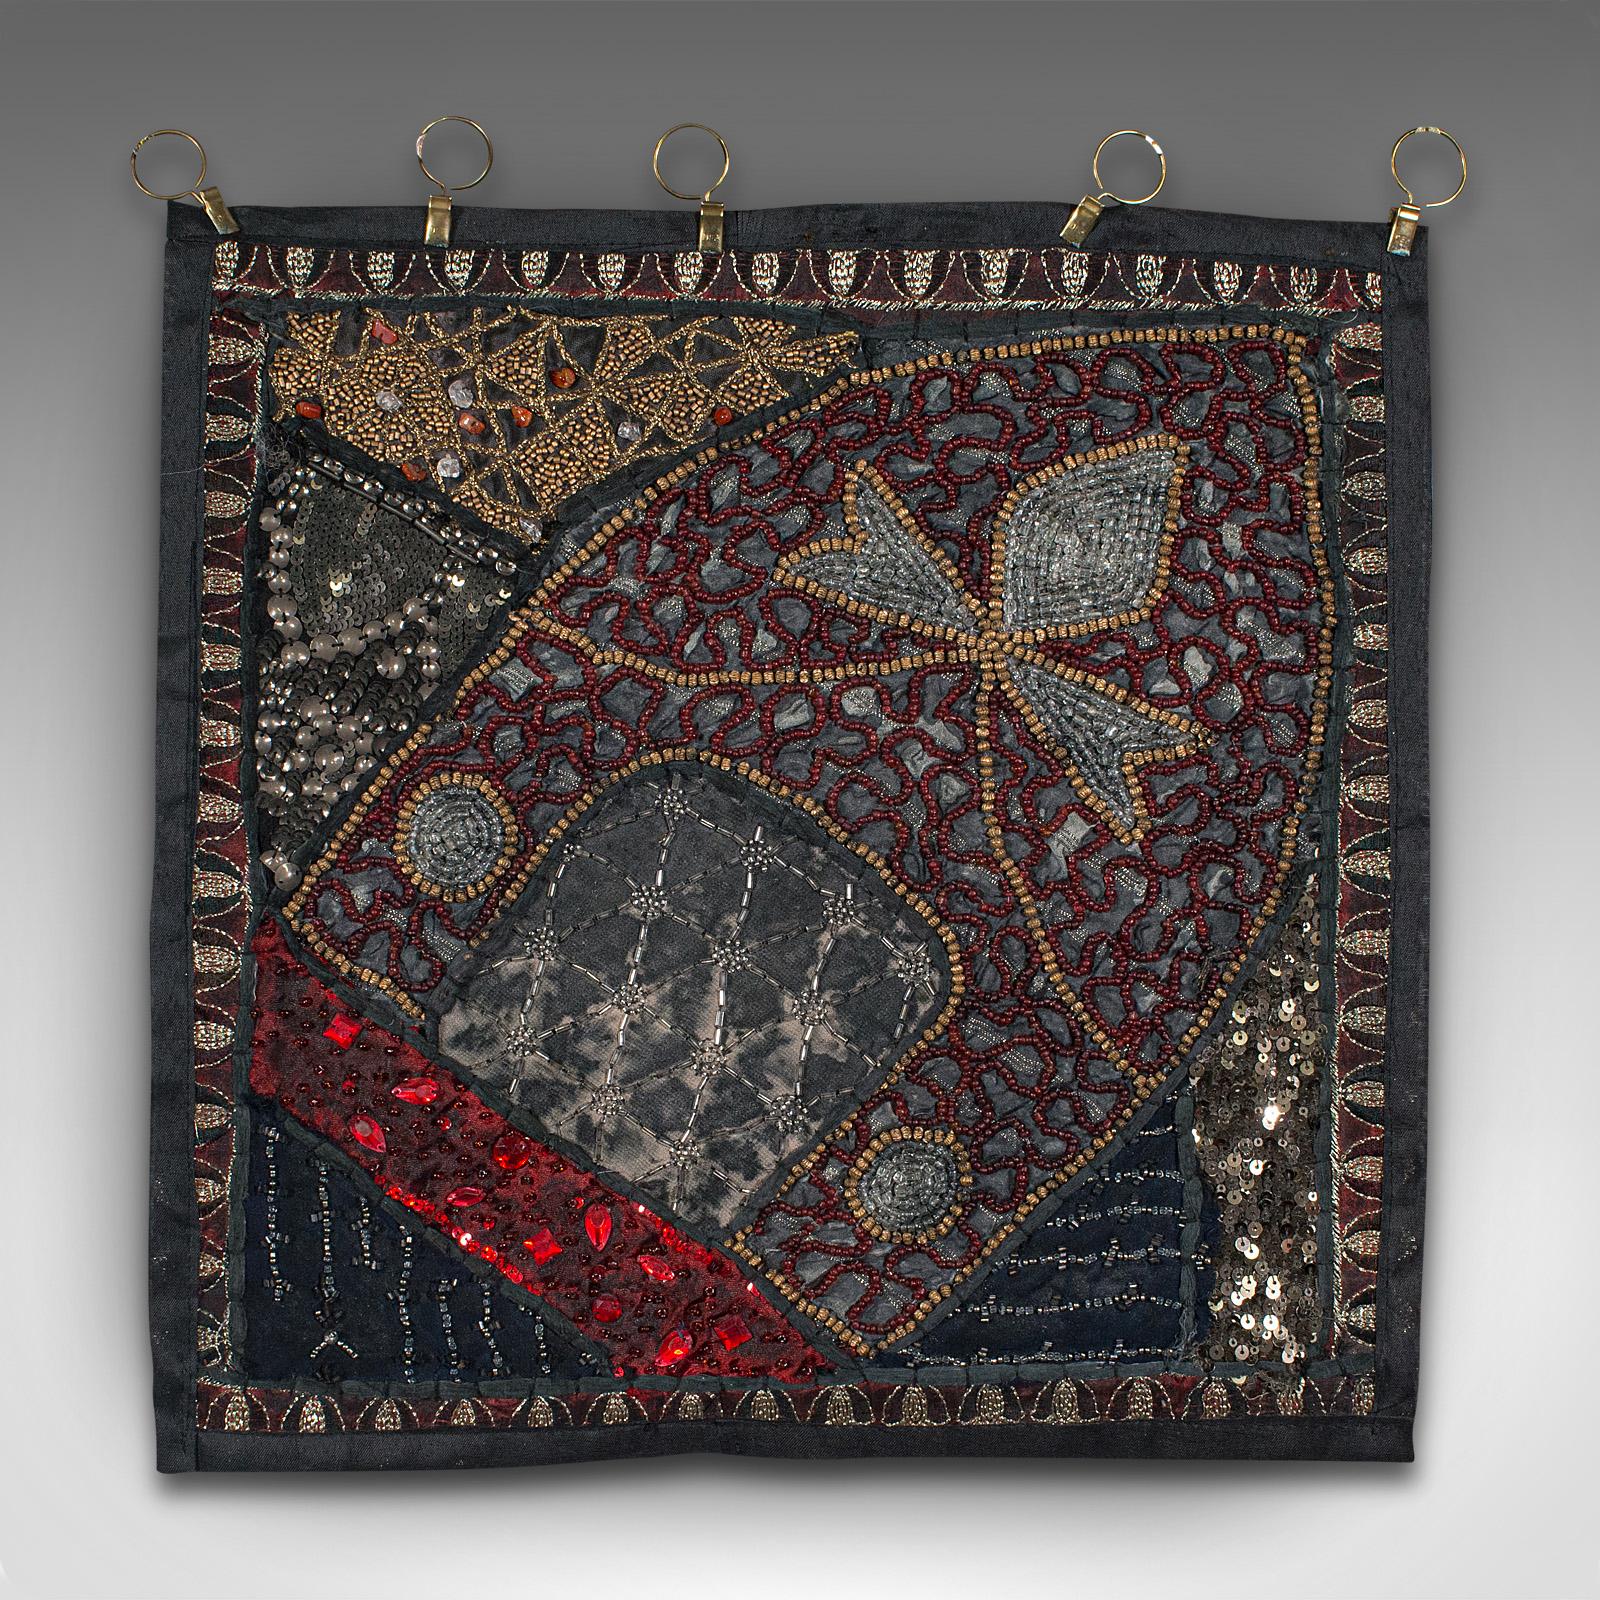 This is a small vintage decorative wall panel. A Middle Eastern, ornate square textile frieze with sequins and faux gemstones, dating to the late 20th century, circa 1980.

Distinctively decorated square panel with eye-catching finish
Displays a